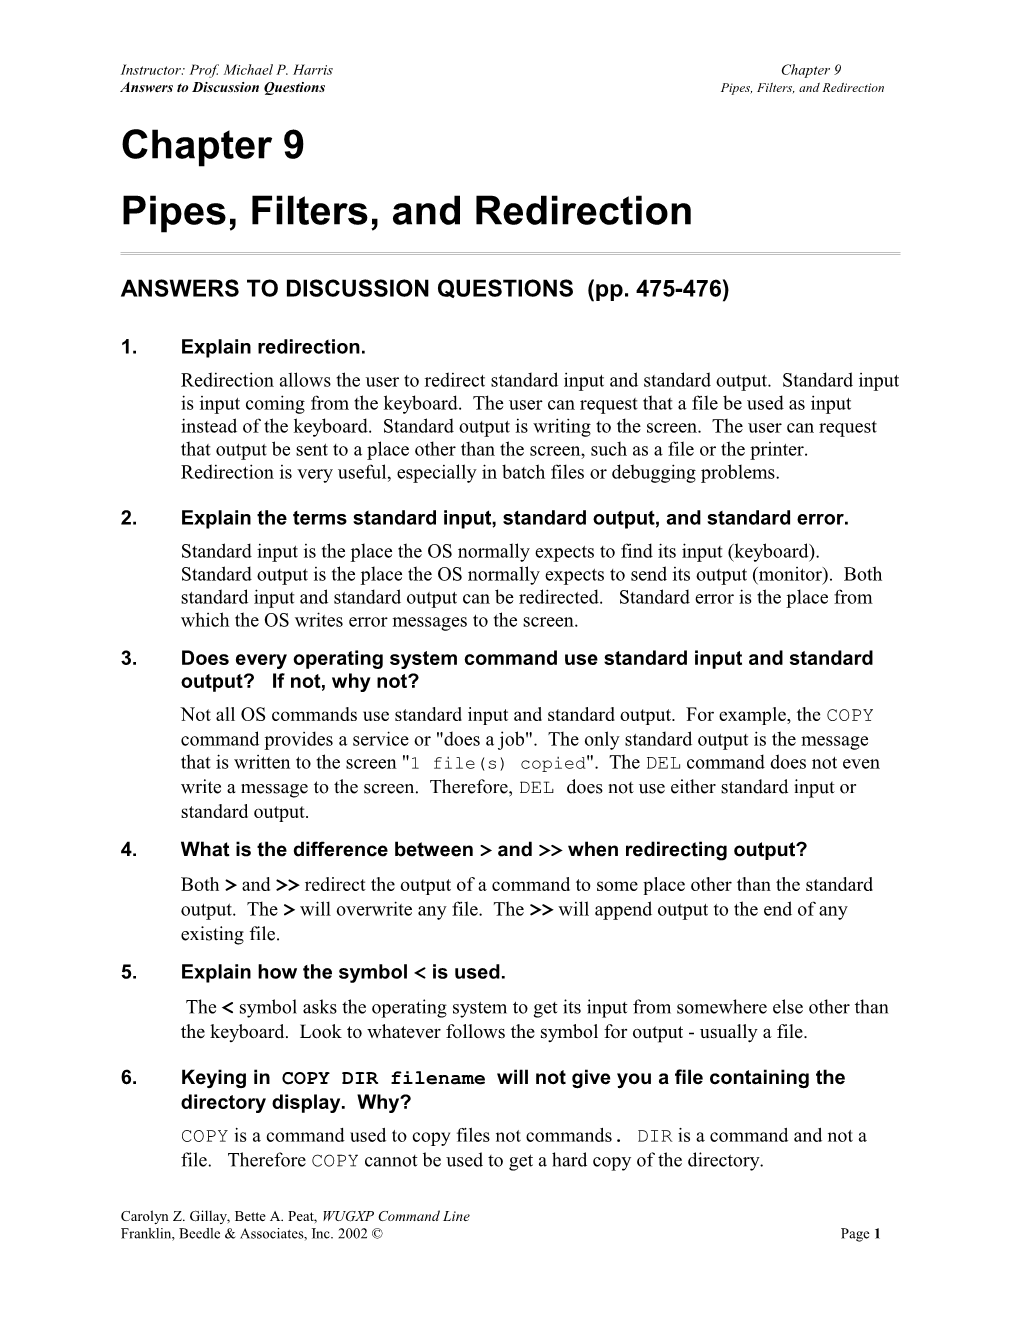 Ch 9 -Pipes, Filters, and Redirection